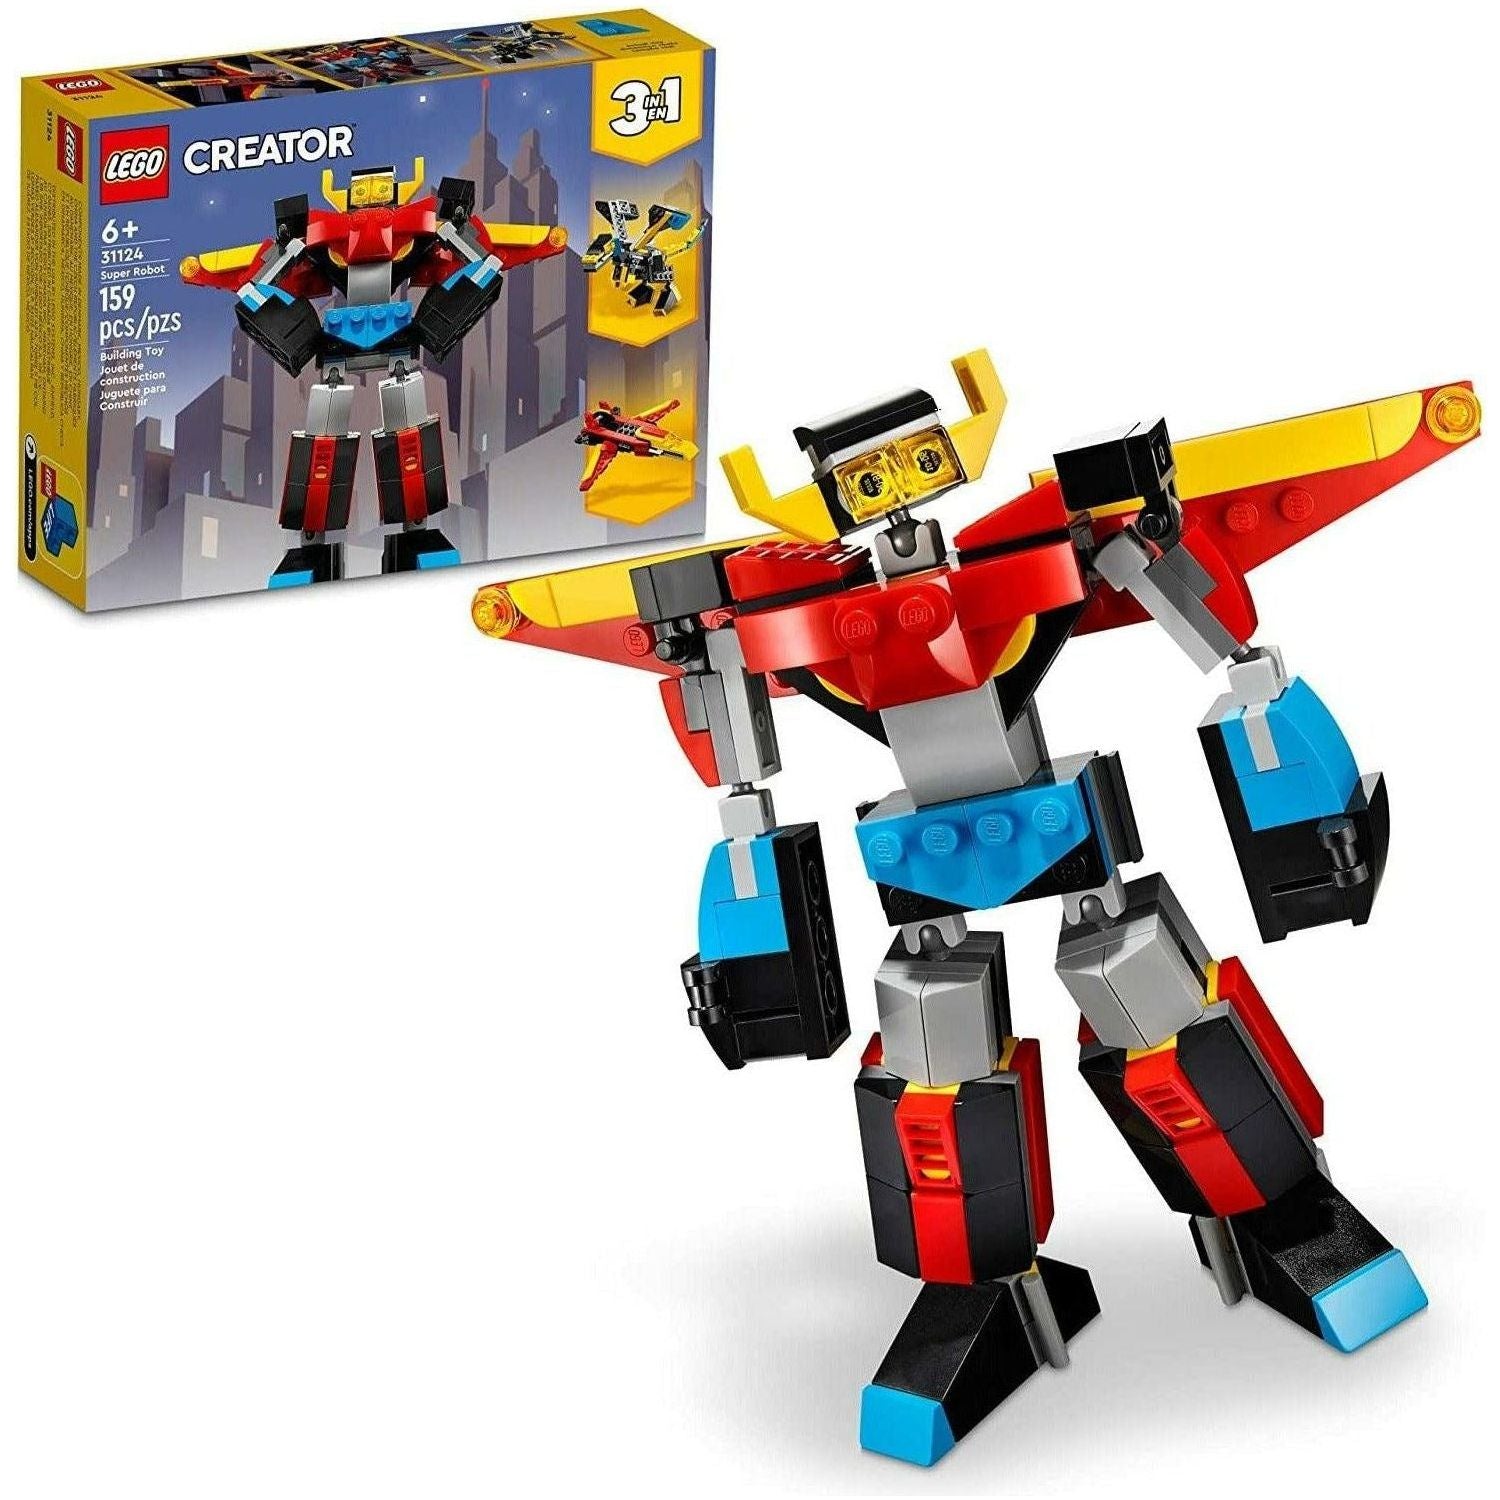 LEGO Creator 3in1 Super Robot 31124 Building Kit Featuring a Robot Toy, a Jet Airplane and a Dragon Model 159 Pieces - BumbleToys - 8+ Years, 8-13 Years, Boys, Creator, Creator 3In1, LEGO, OXE, Pre-Order